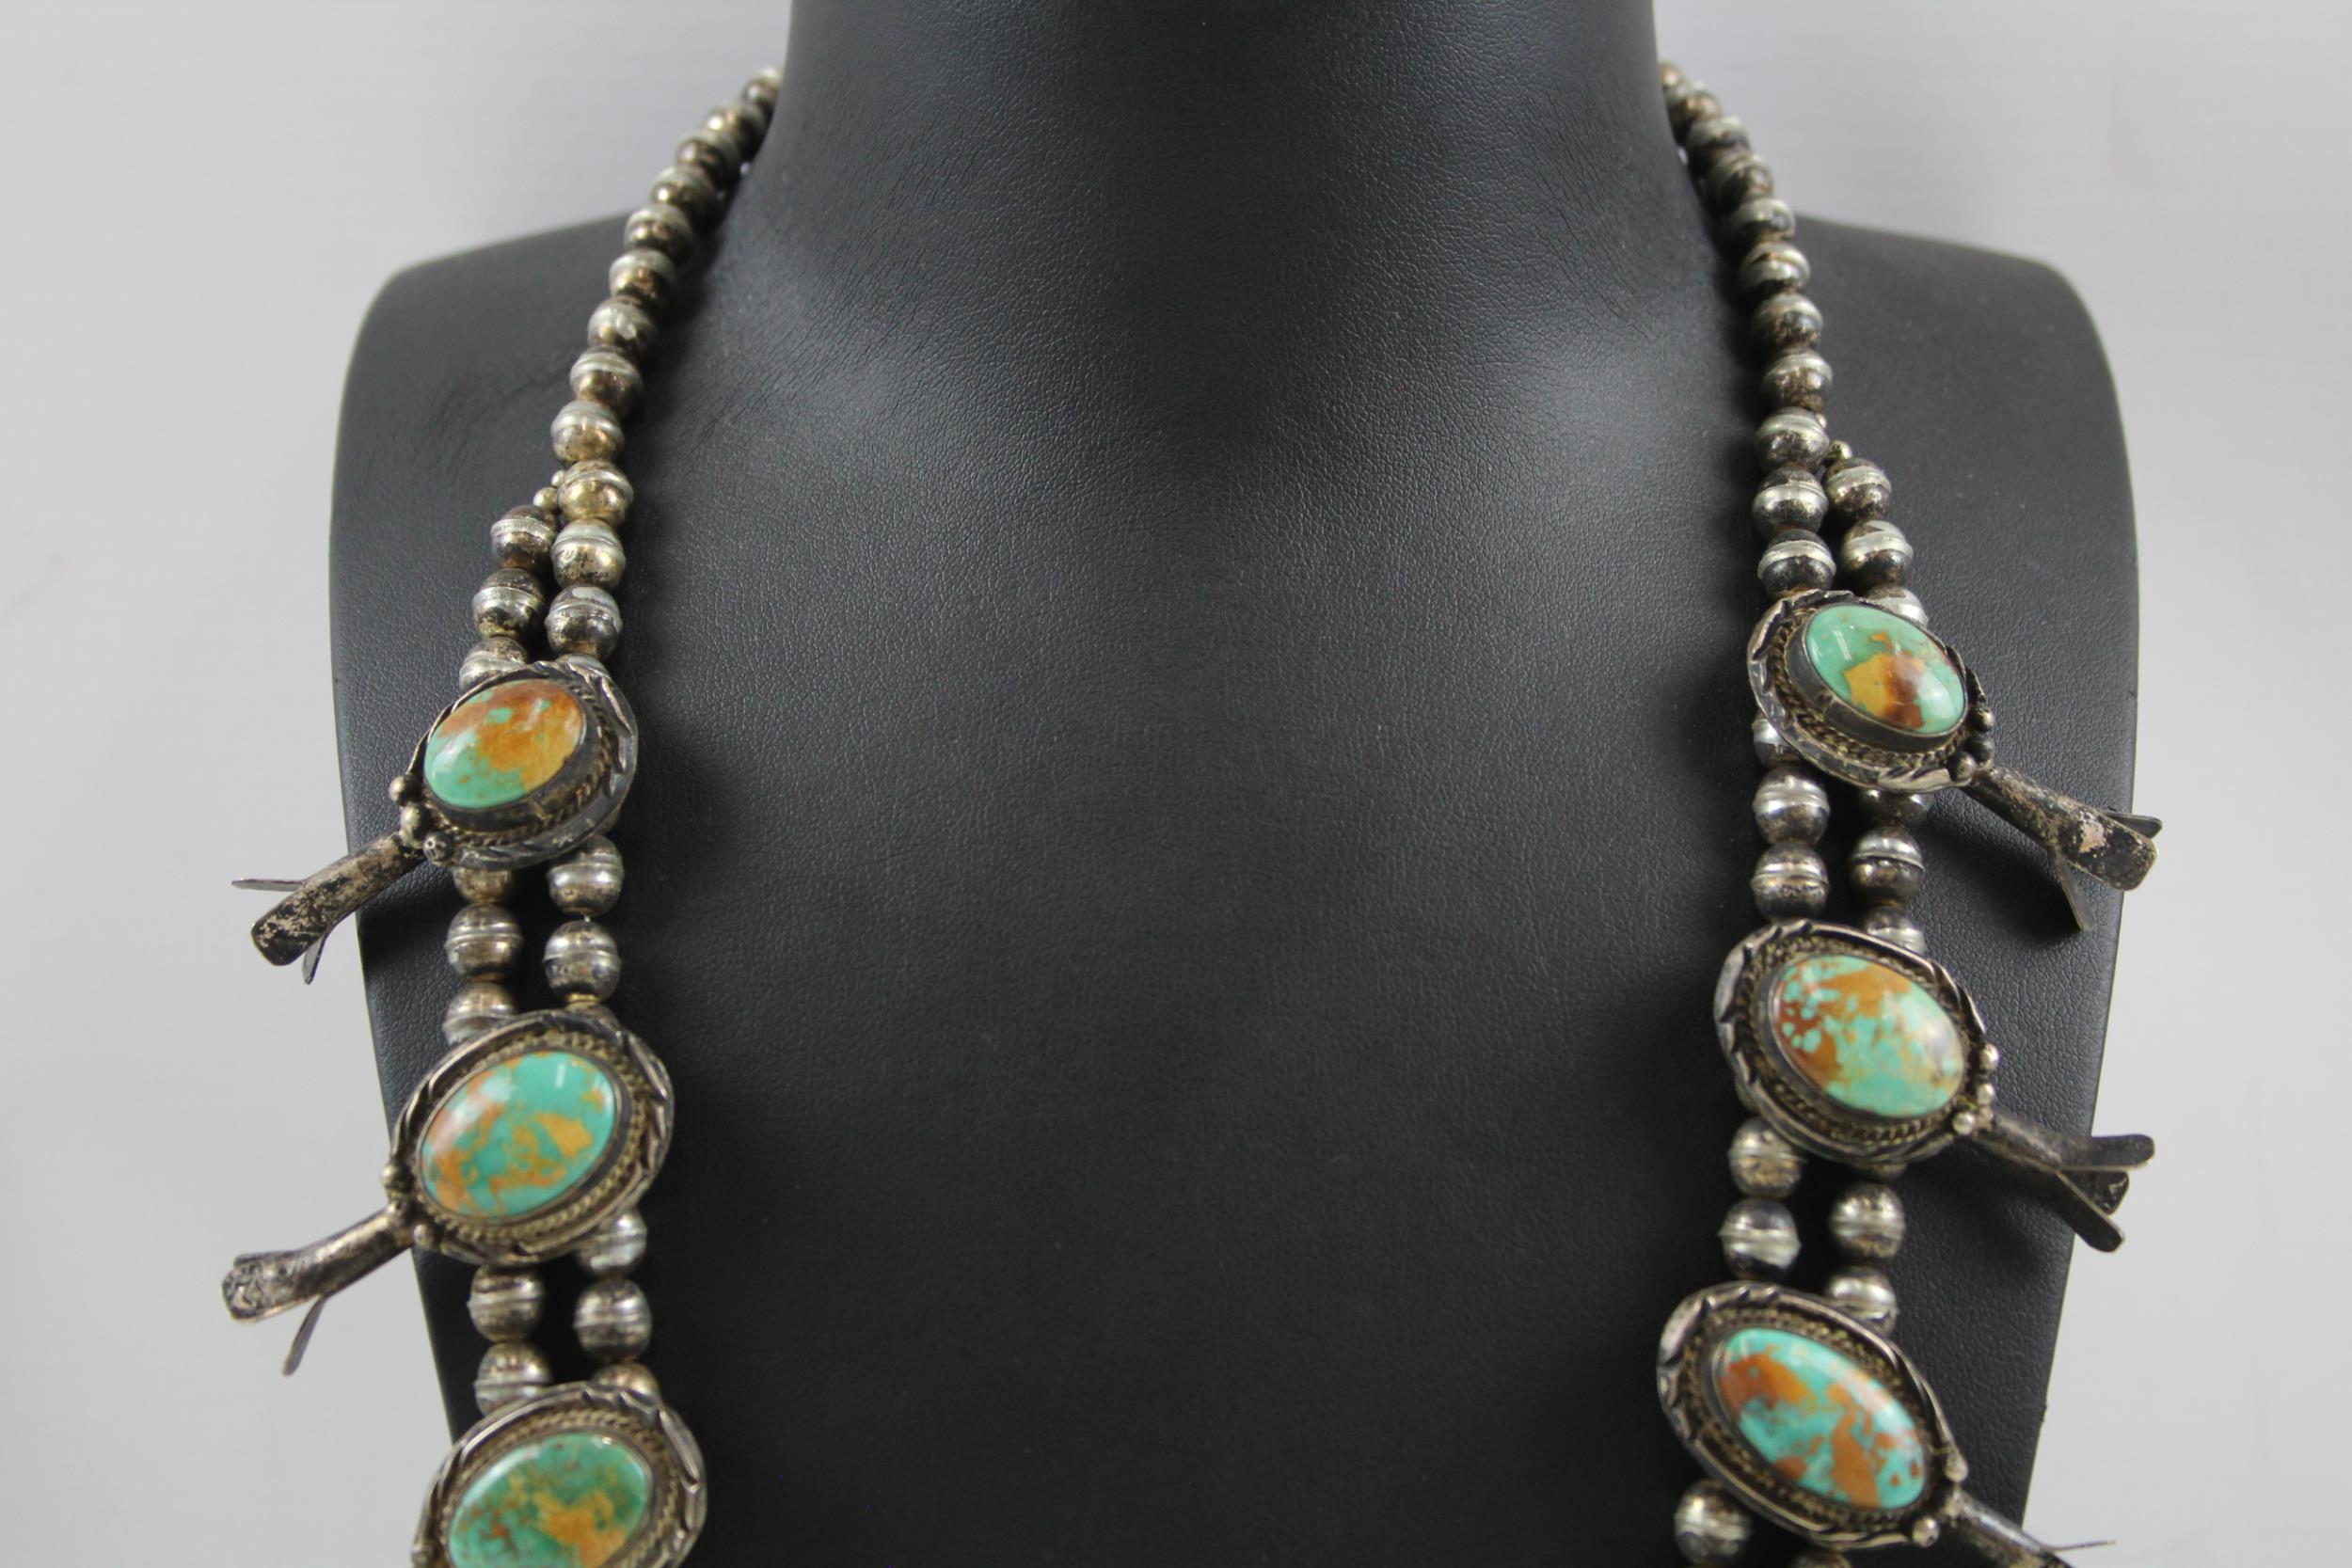 Silver Navajo jewellery set including squash blossom by Dave Pino (single earring) (315g) - Image 5 of 8